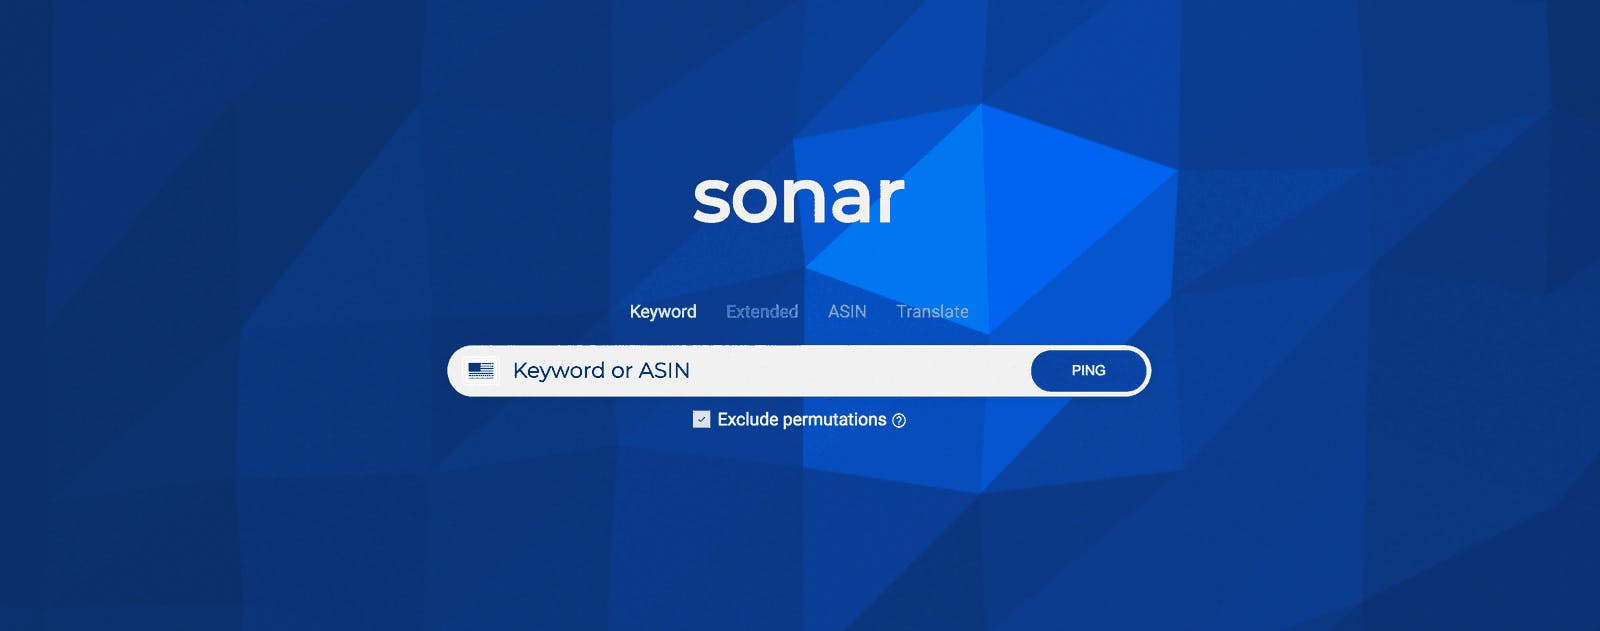 Sonar Tool for Amazon Review